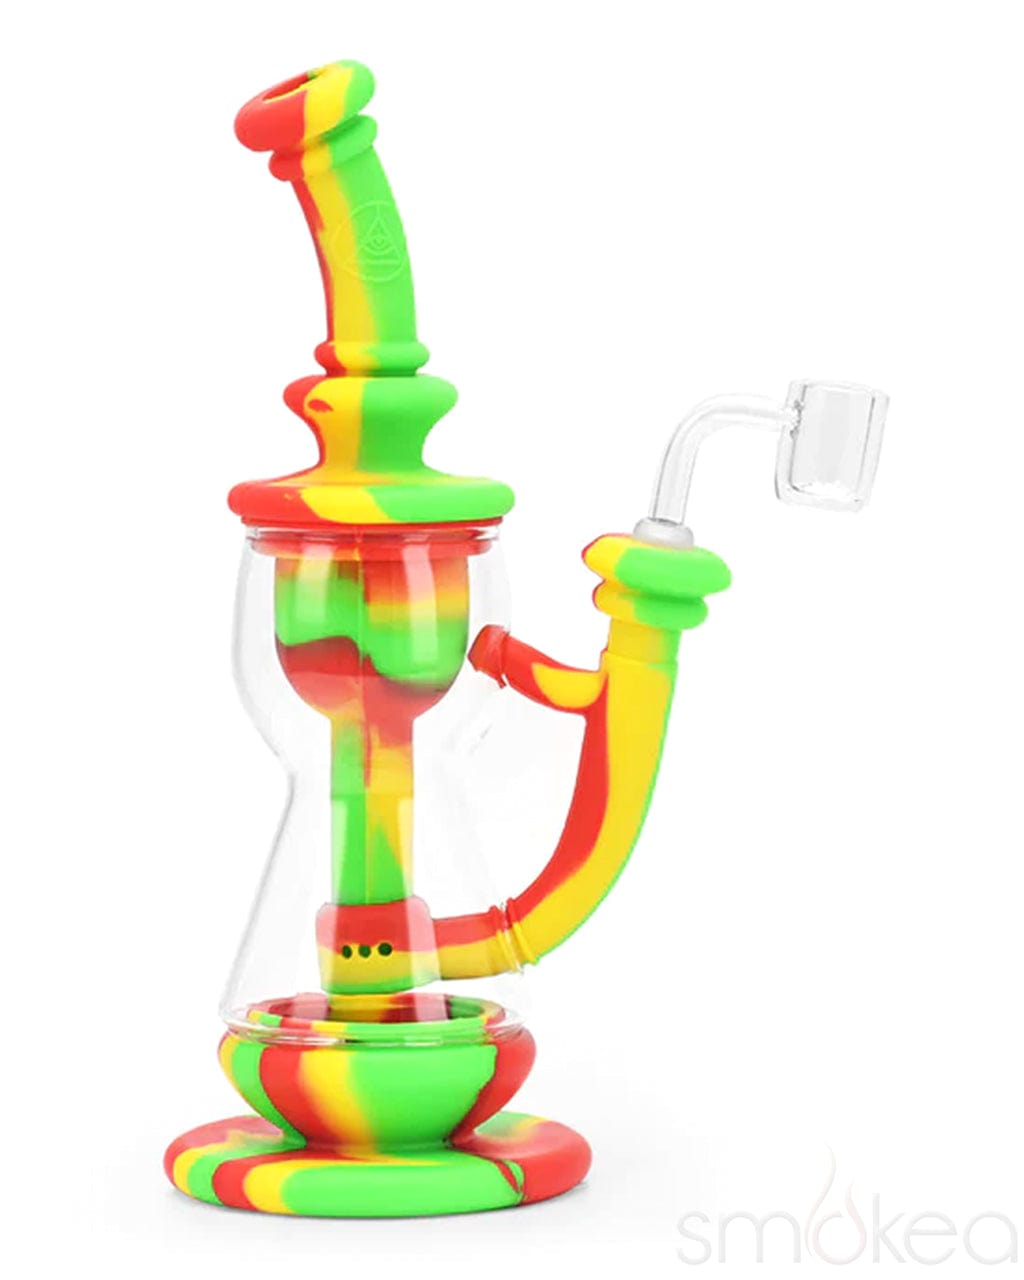 Ritual 10 Deluxe Silicone Incycler Dab Rig